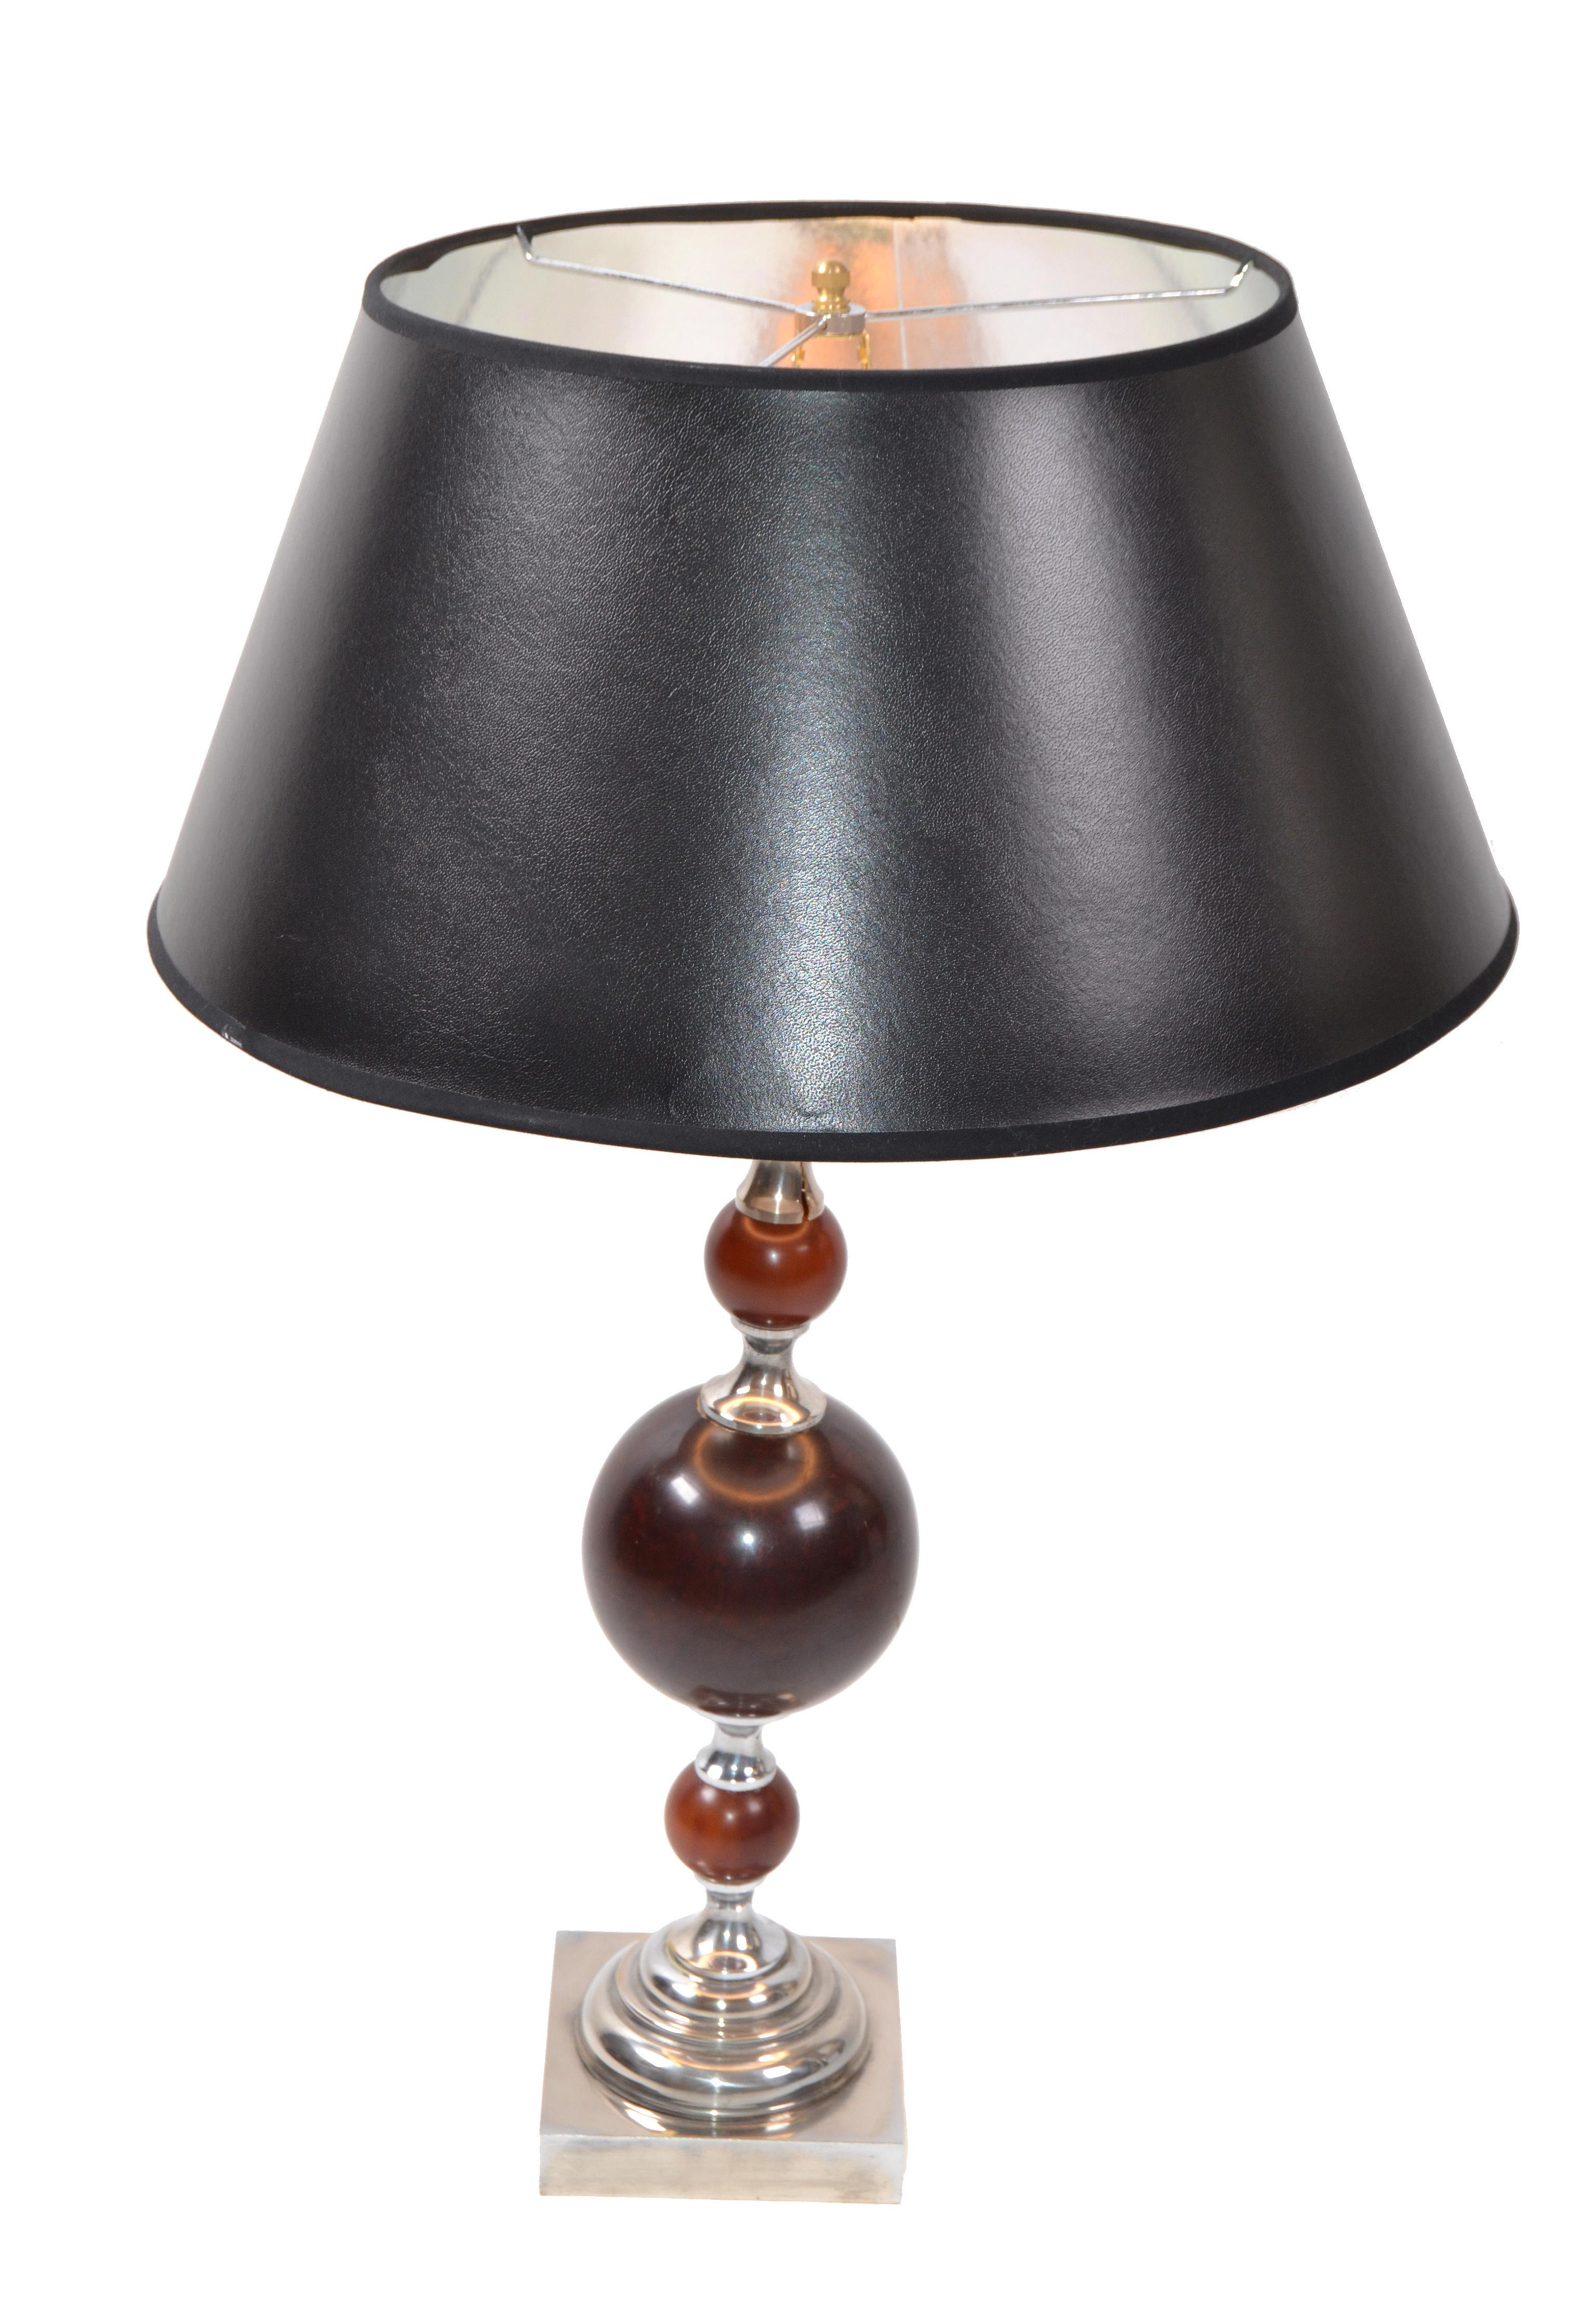 Art Deco Maison Charles style French 3 Burgundy Spheres Nickel-Plated Table Lamp For Sale 7